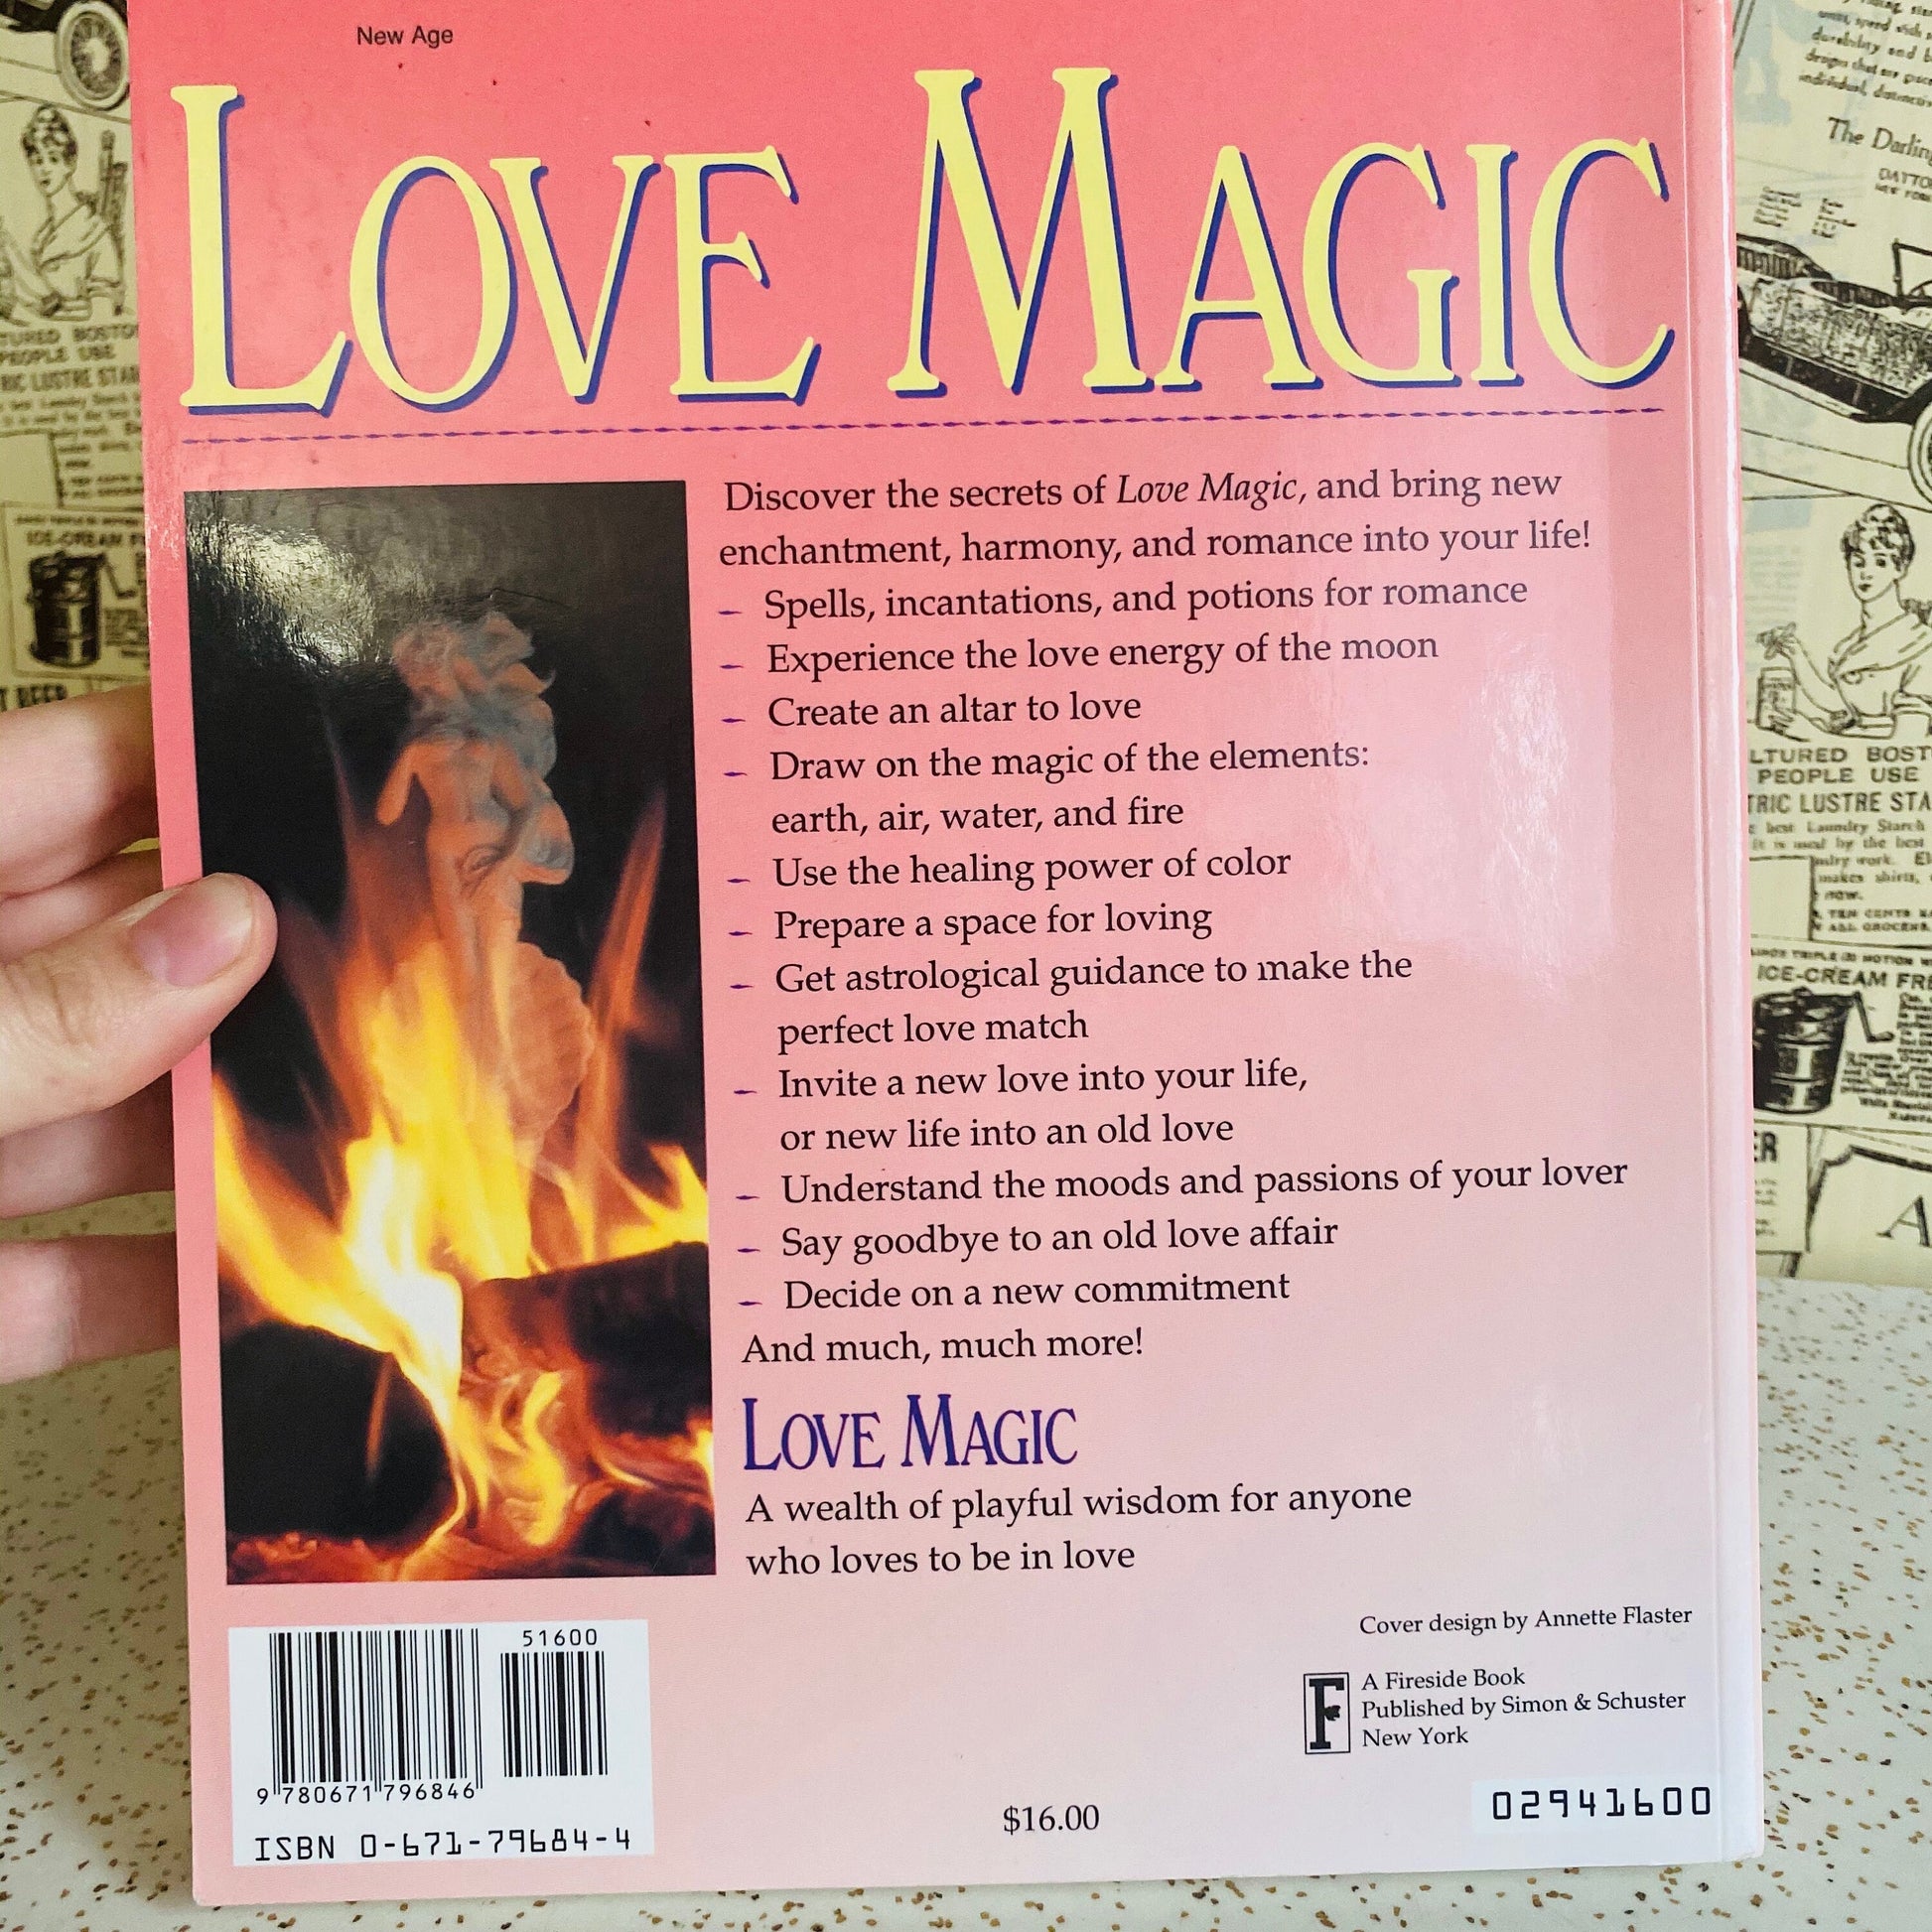 1994 Love Magic book by Marina Medici. Vintage love magic book with love spells, rituals. Great Valentine's Day gift for new witch or lover